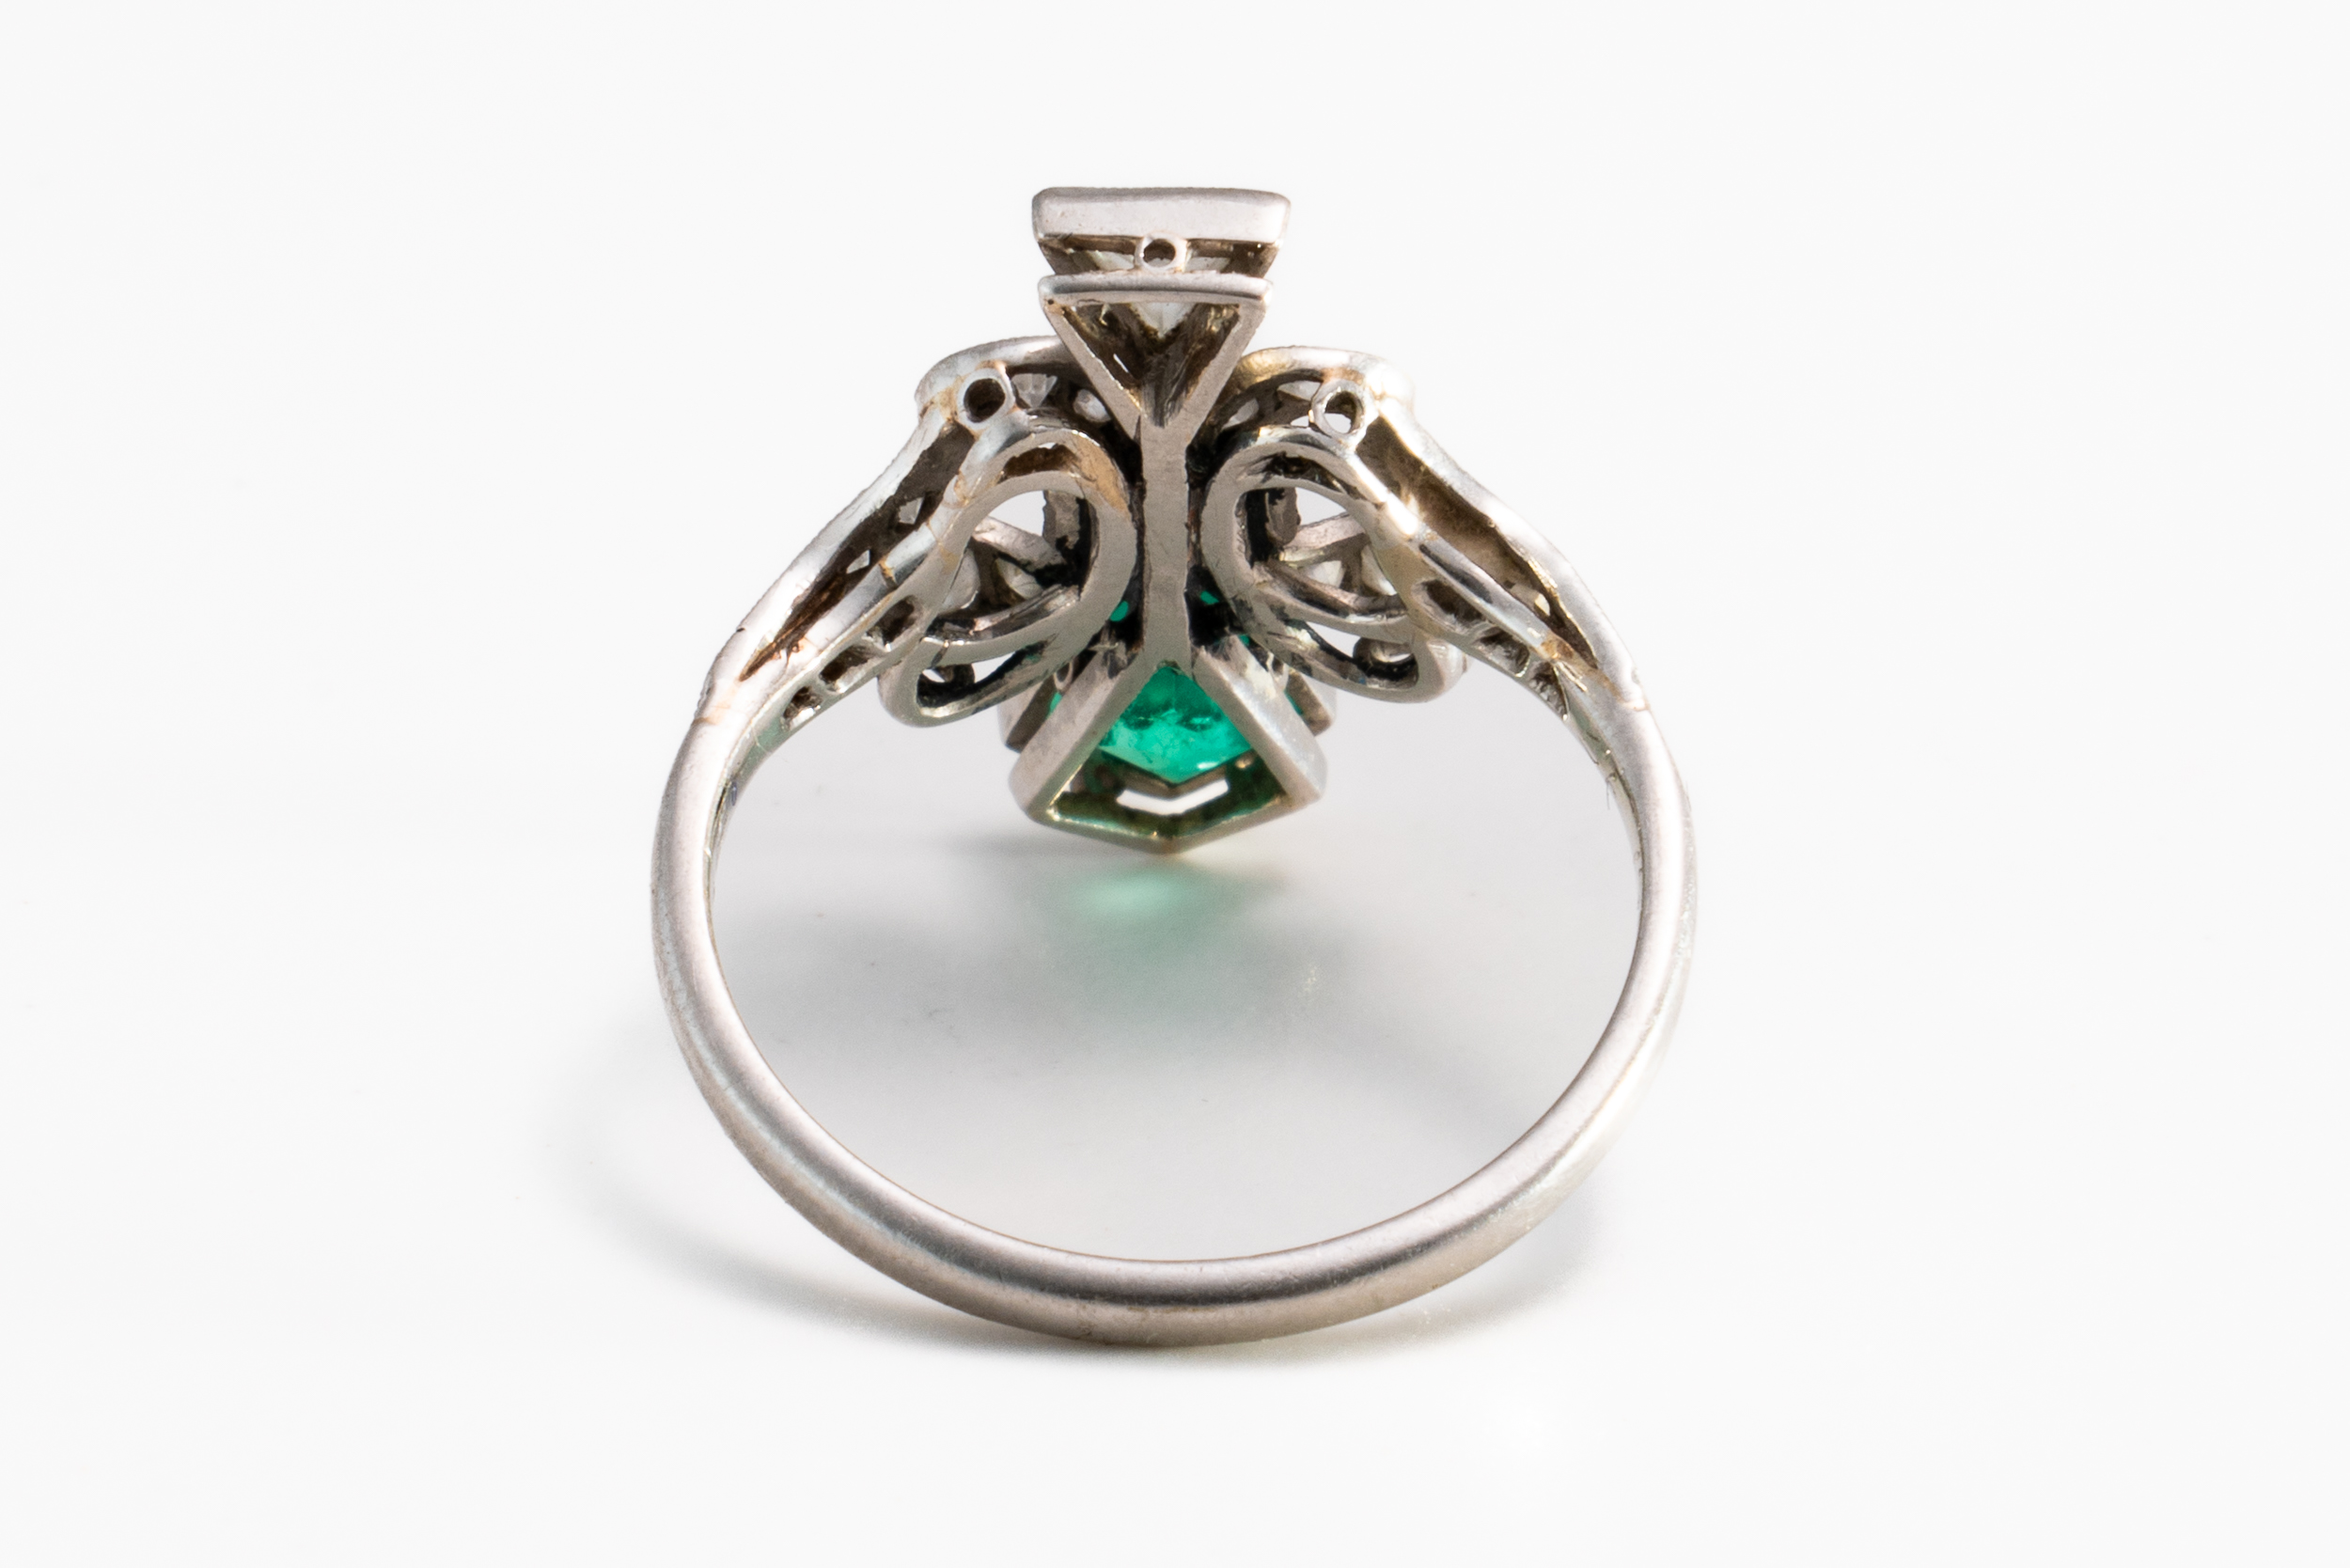 AN ART DECO EMERALD AND DIAMOND RING - Image 3 of 3